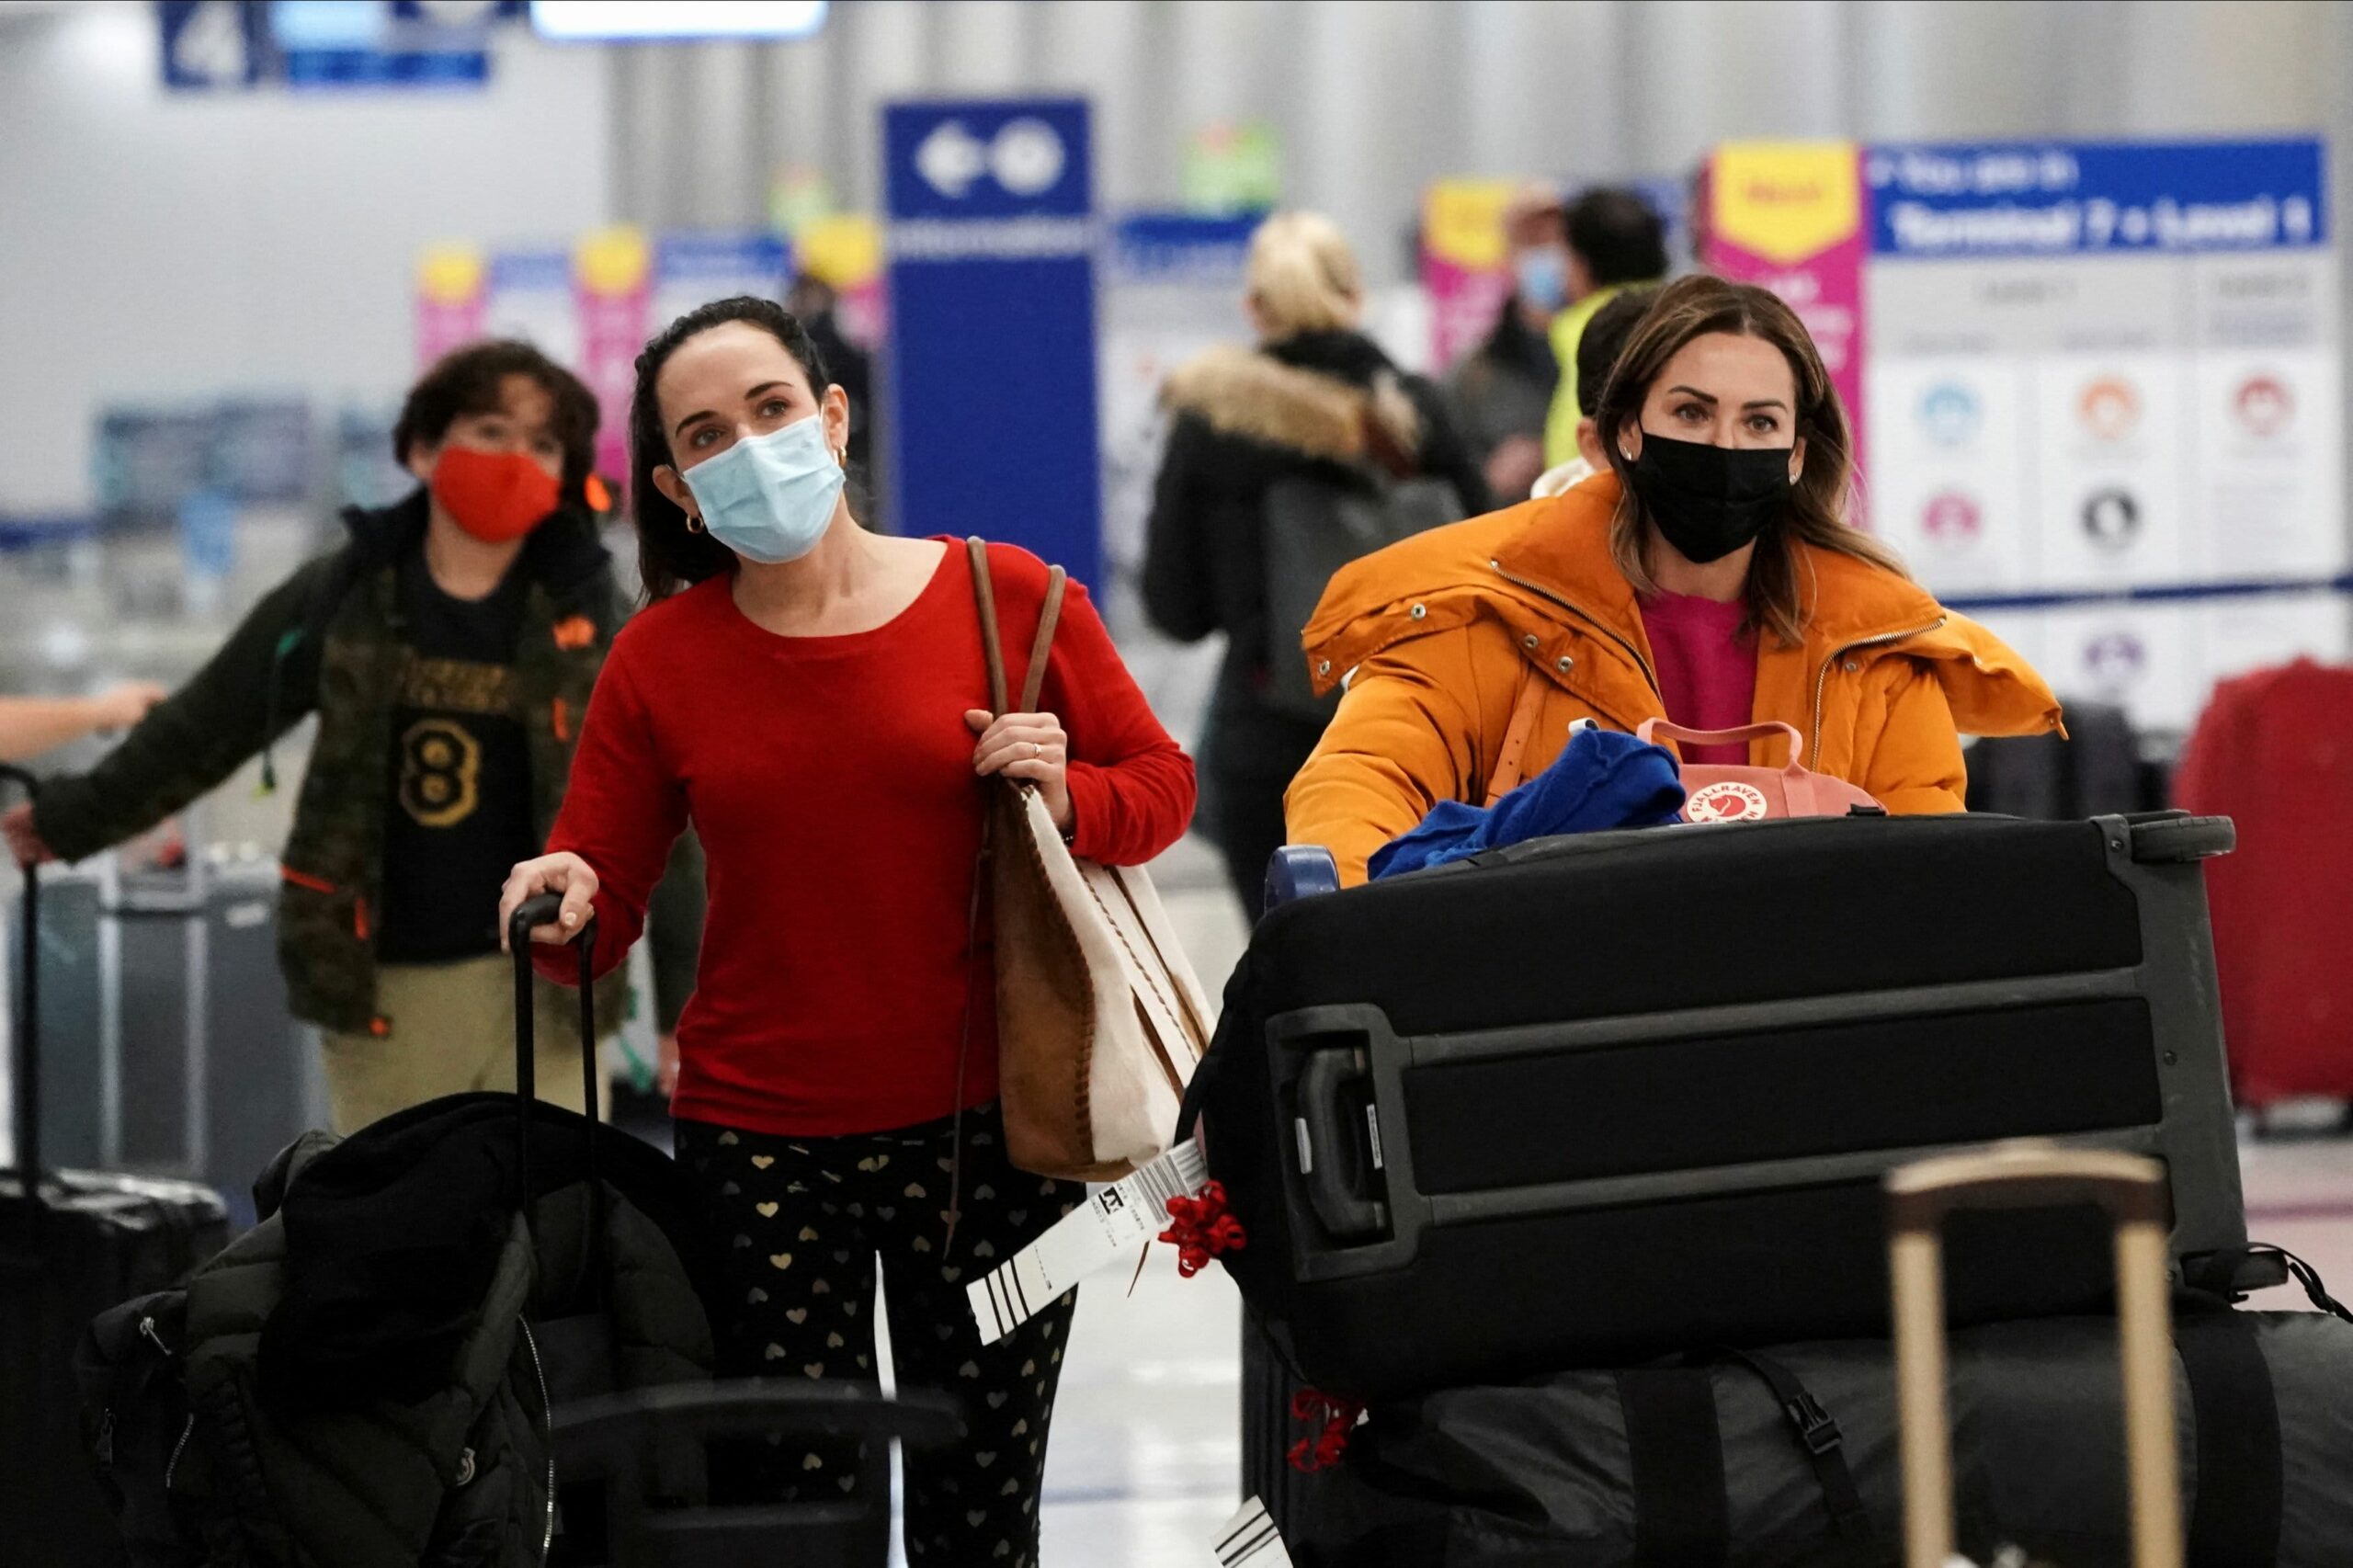 Severe weather, omicron infections drive thousands more U.S. flight cancellations